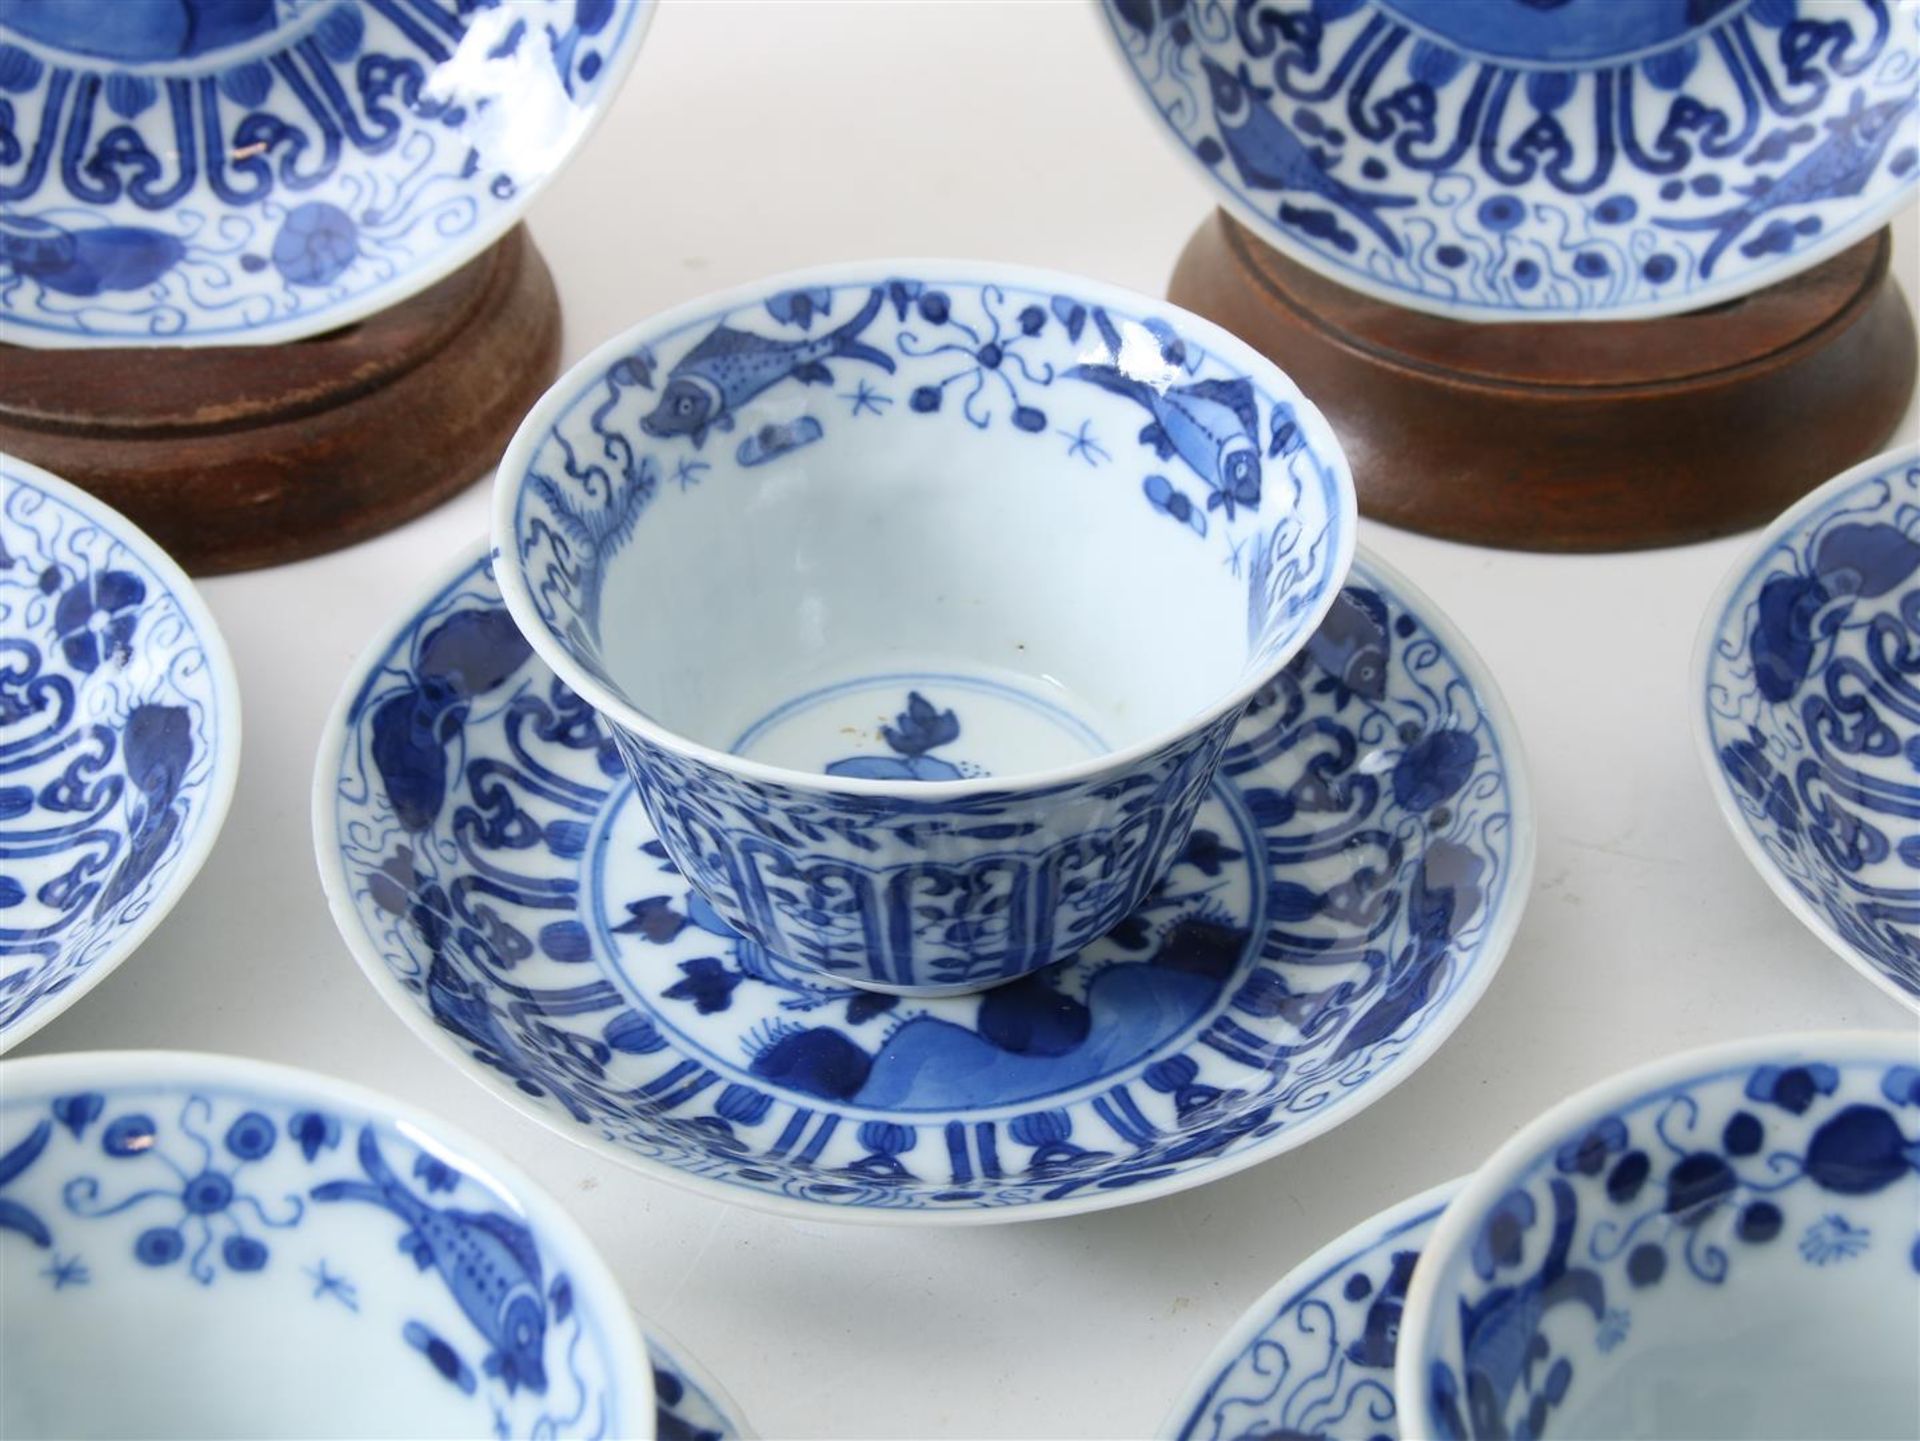 Lot of 12 porcelain cups and 11 saucers decorated in blue with perch and butterfly decor, China - Image 9 of 19